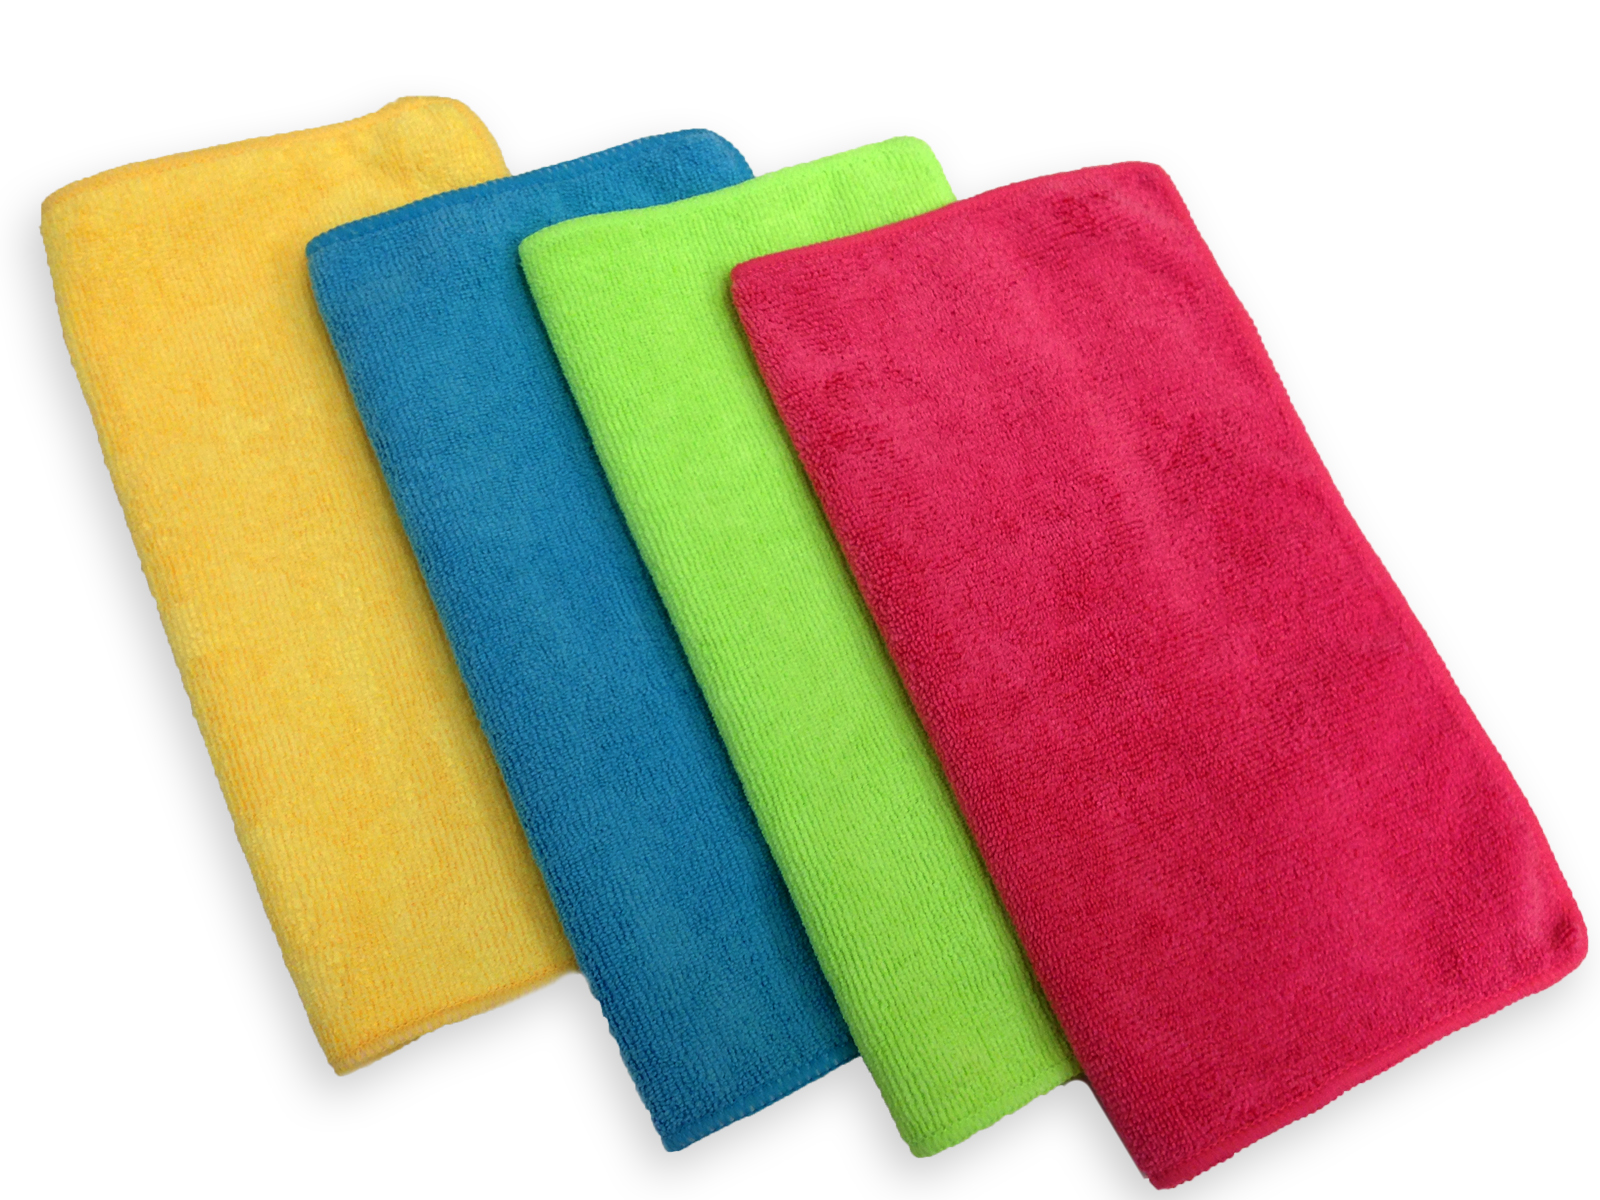 240 Microfiber Pink 12"x12" Cleaning Detailing Cloths Towels Auto Car Rag 300GSM 